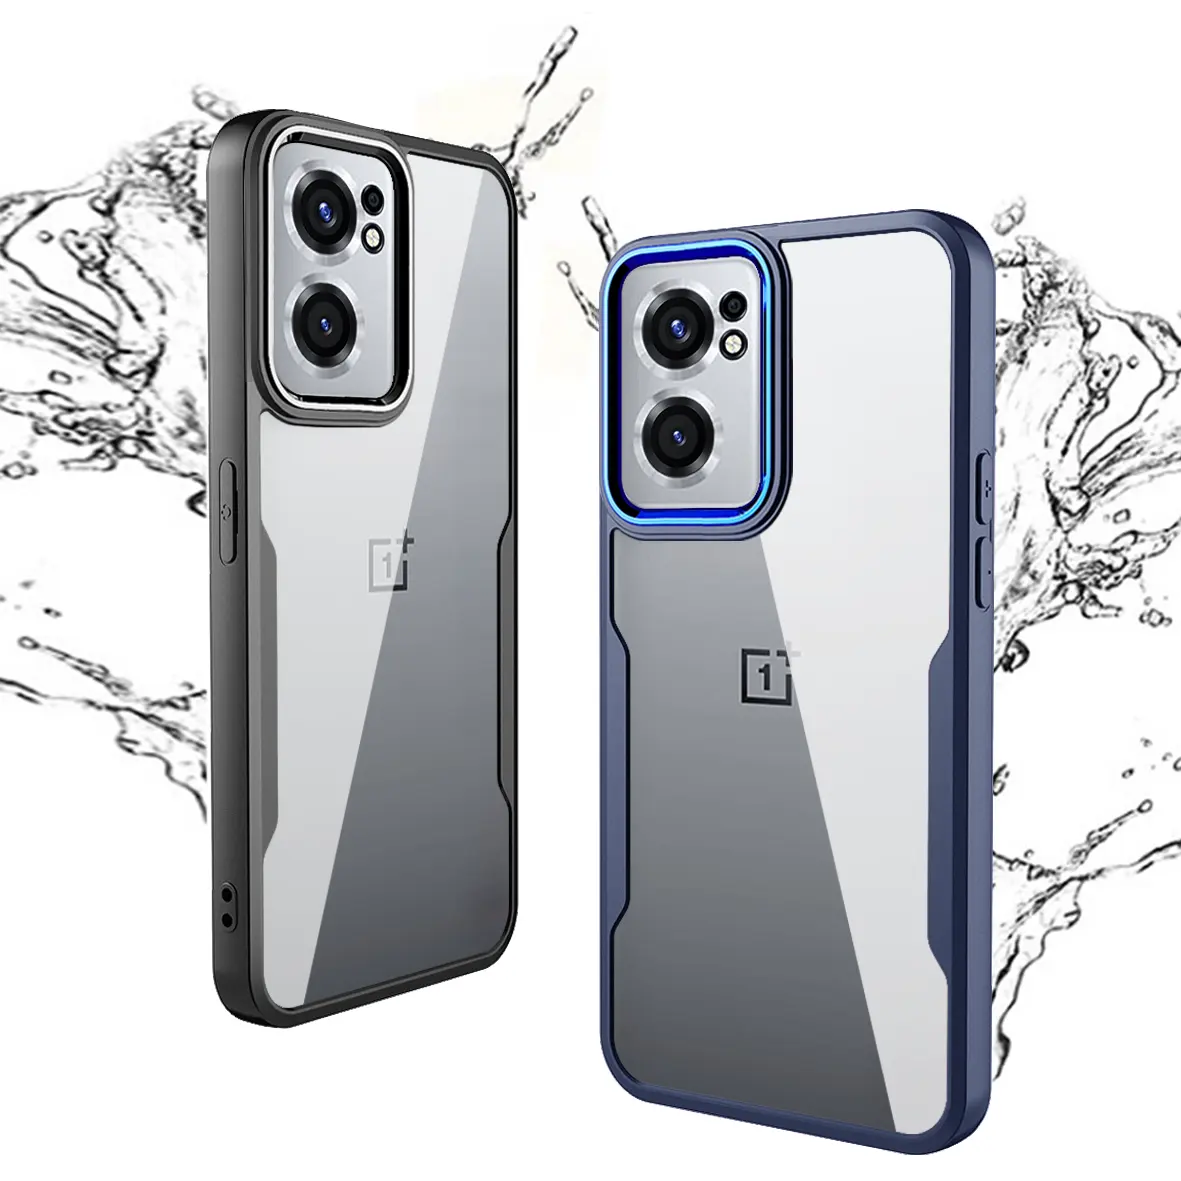 Hybrid Acrylic TPU case Cover for Oneplus Nord CE 2 ACE 5G 10R 10 Pro 2T Noting Phone 1 Armor Protect phone Case